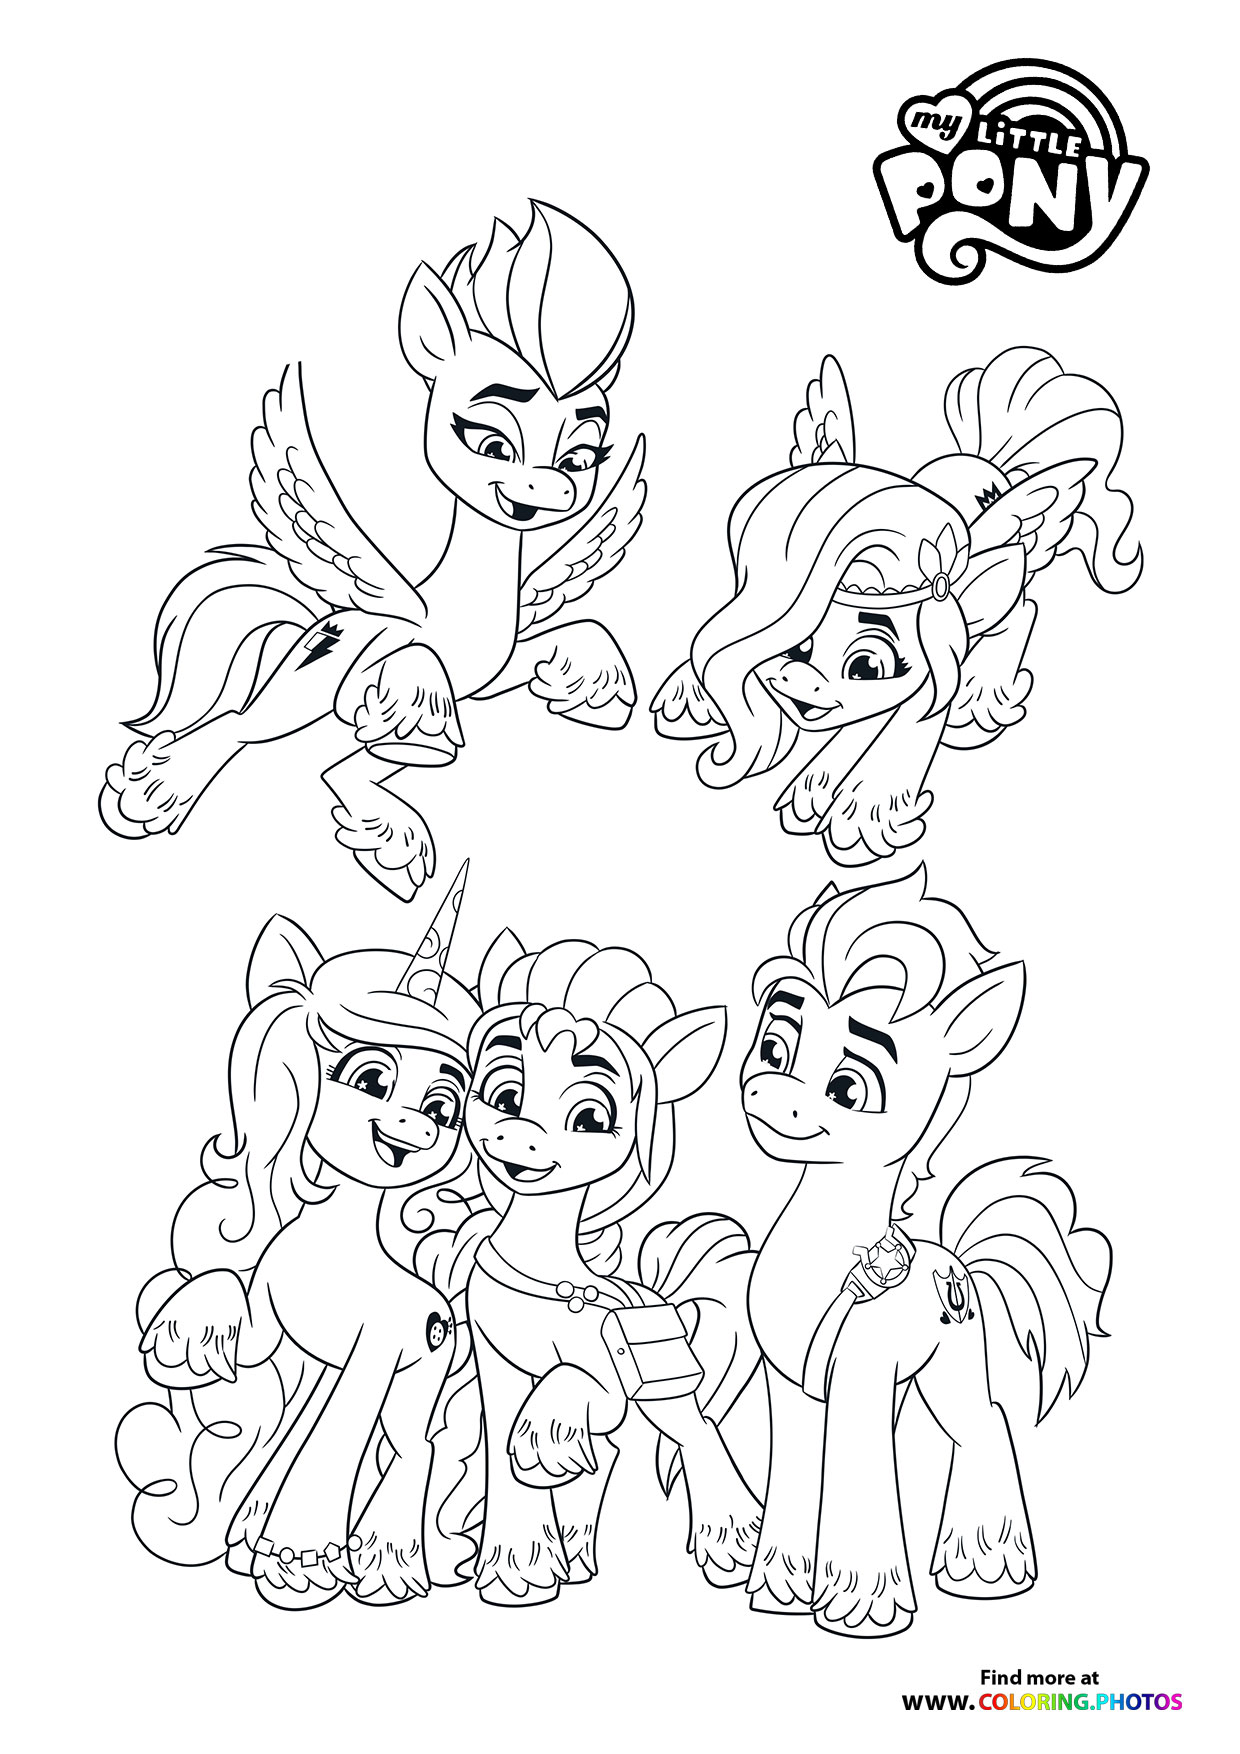 My Little Pony   A New Generation coloring pages for kids   Print ...